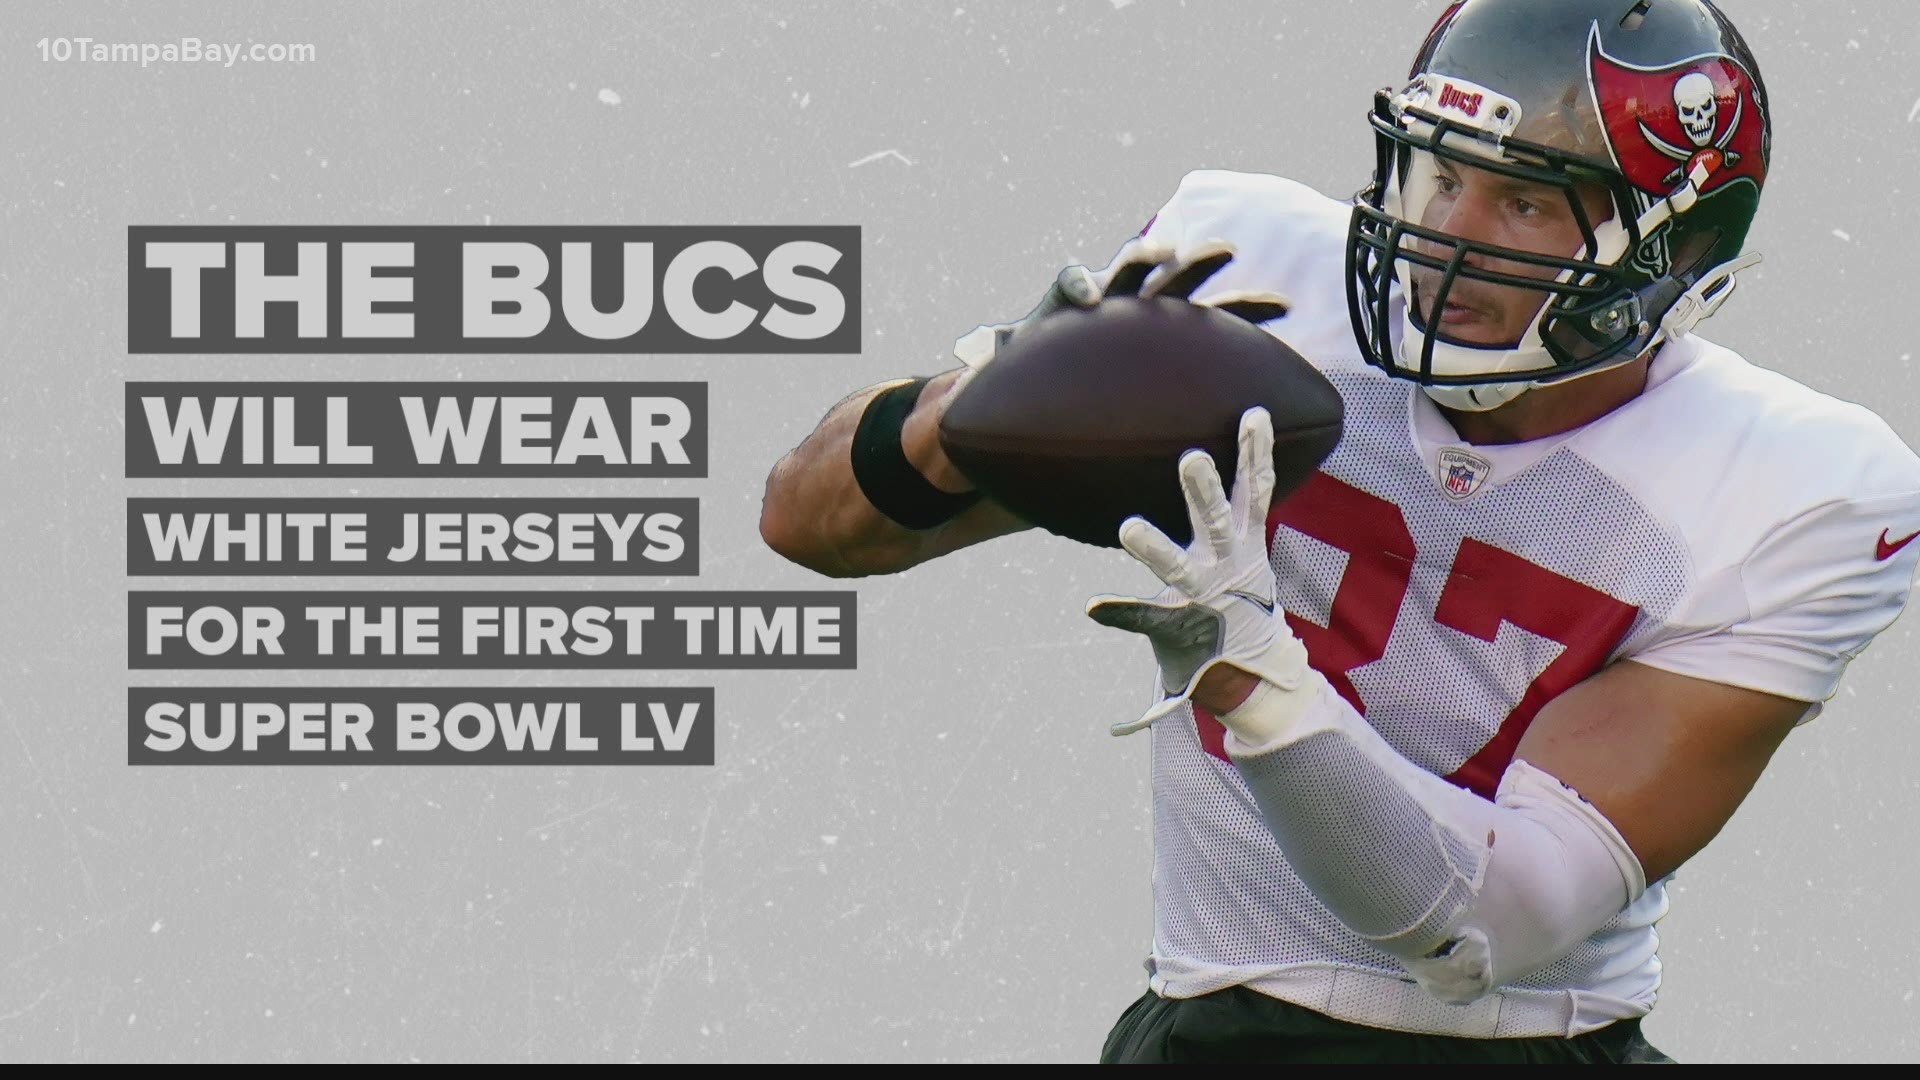 The Bucs will win their white jerseys and pewter pants for Super Bowl LV.